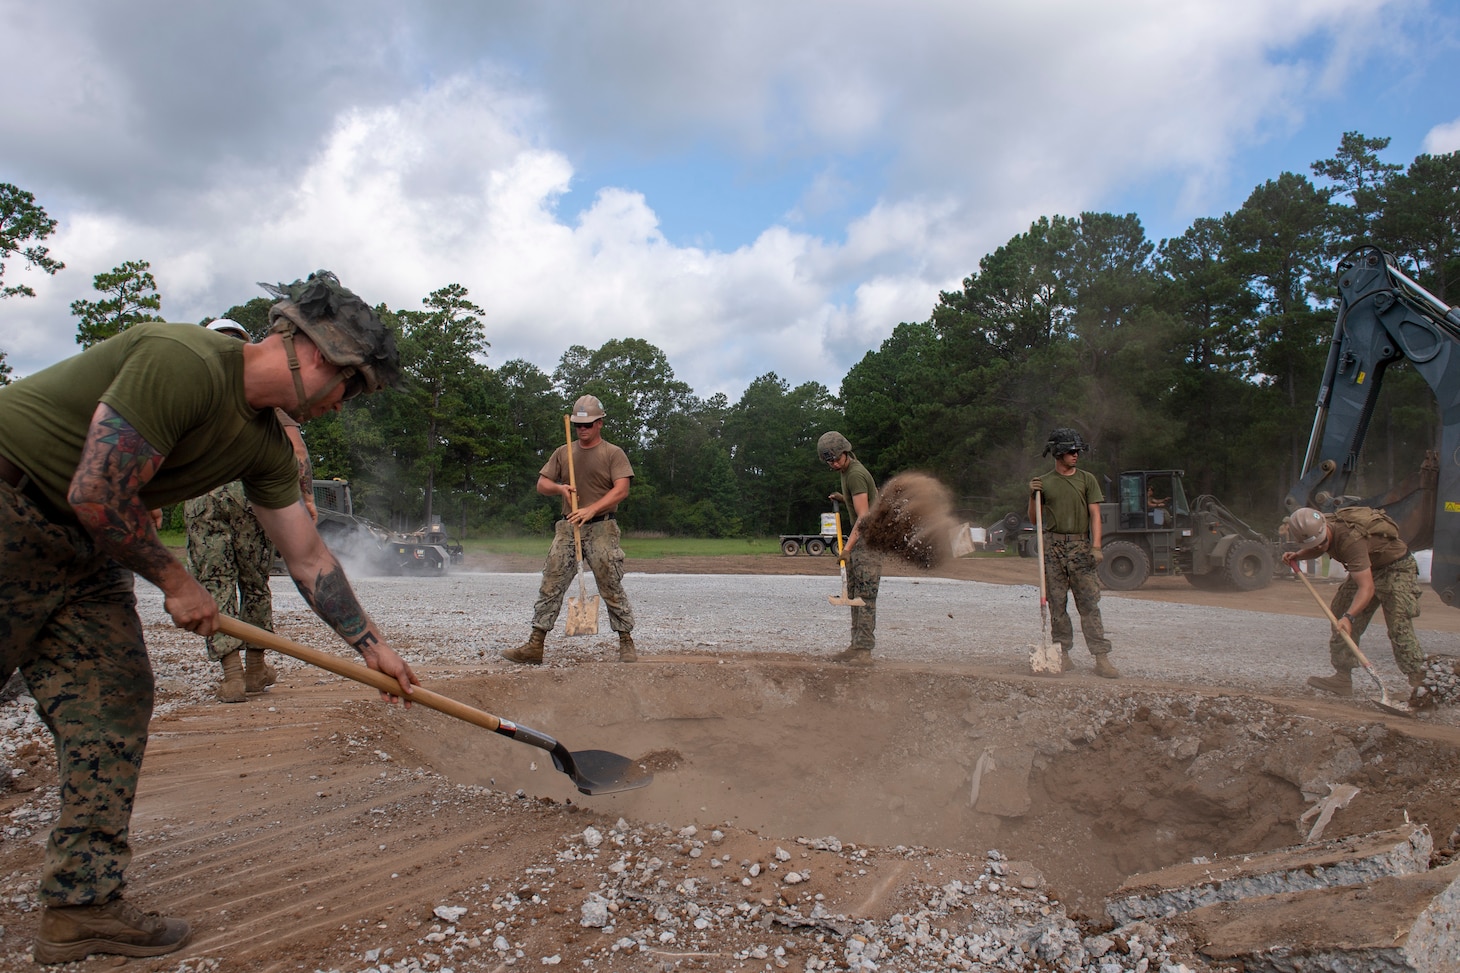 CAMP SHELBY, Miss. (Jul. 20, 2022) Seabees assigned to Naval Mobile Construction Battalion (NMCB) 1 work together with Marines assigned to Marine Wing Support Squadron (MWSS) 273 on repairing the damaged airfield during the airfield damage repair exercise during Operation Turning Point, also known as their Field Training Exercise.